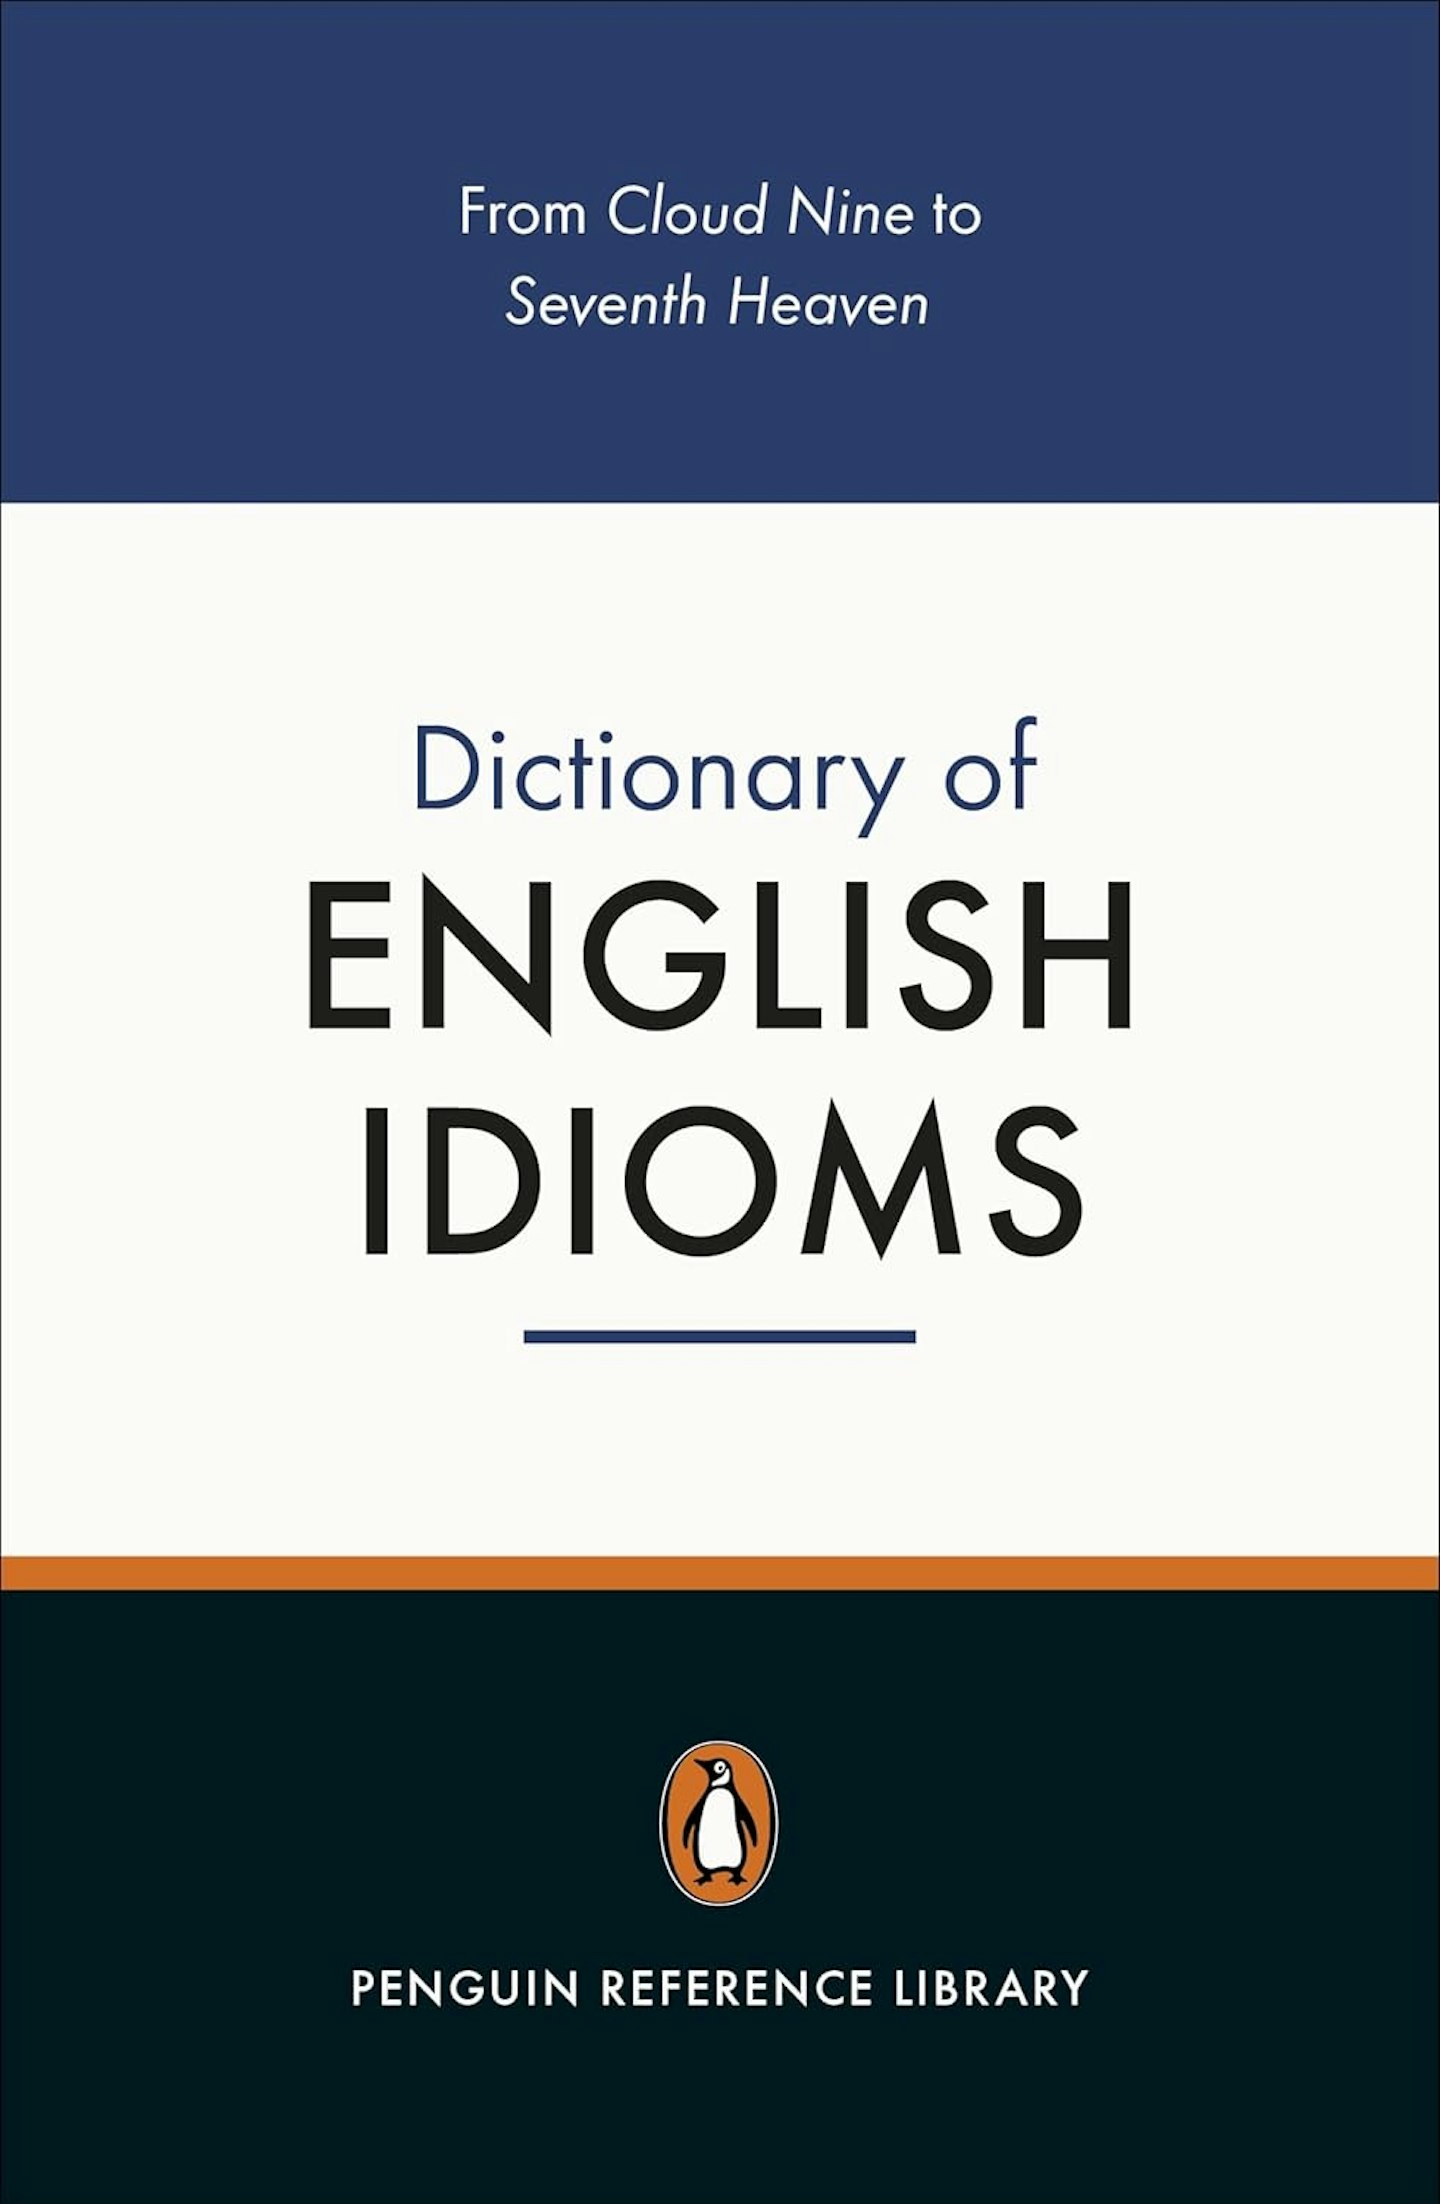 Penguin Reference Library Dictionary of English Idioms